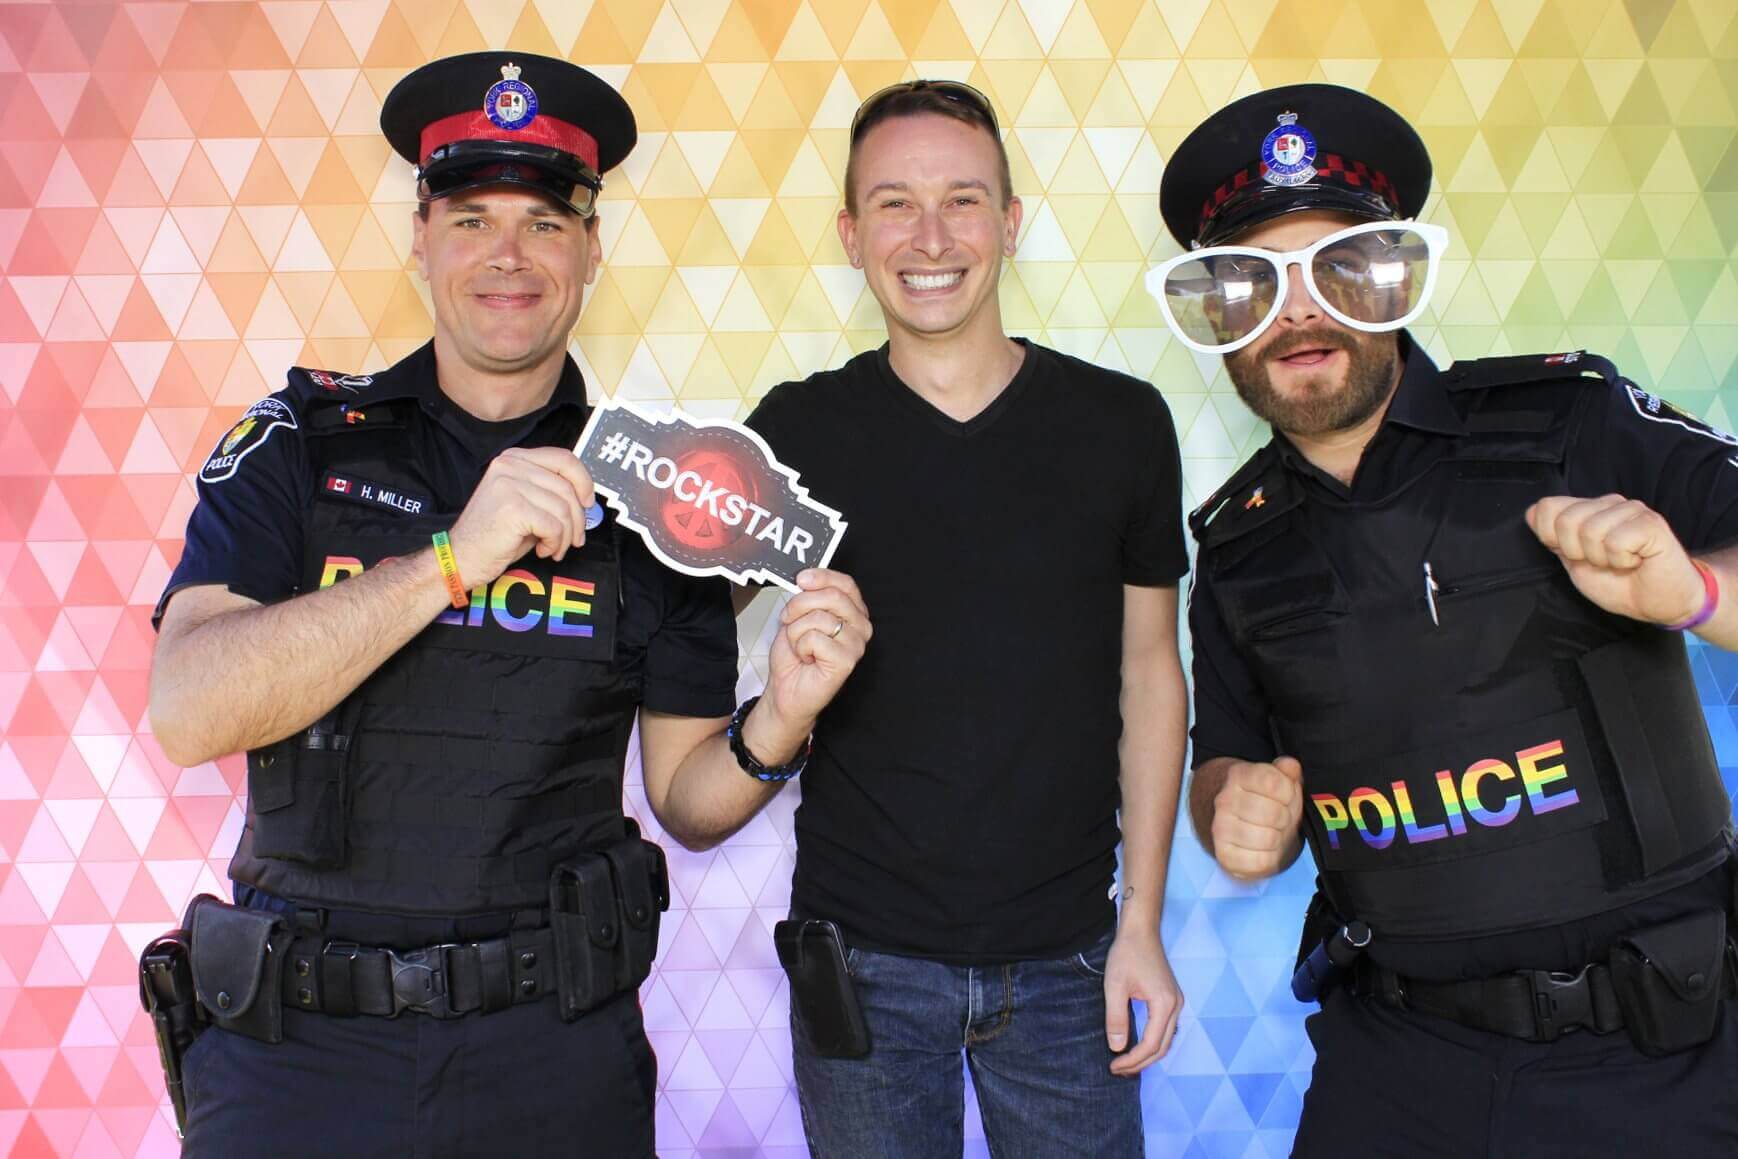 Photo booth rental in Toronto for an event. Posing in front of a fun mosaic backdrop offered by LOL Photo Booth. Tags: Event planning ideas, Photo booth prints, high resolution photos, Toronto photo booth rental services. GIFS, Boomerangs, Mosaic Walls, Slow motion, brand activation.